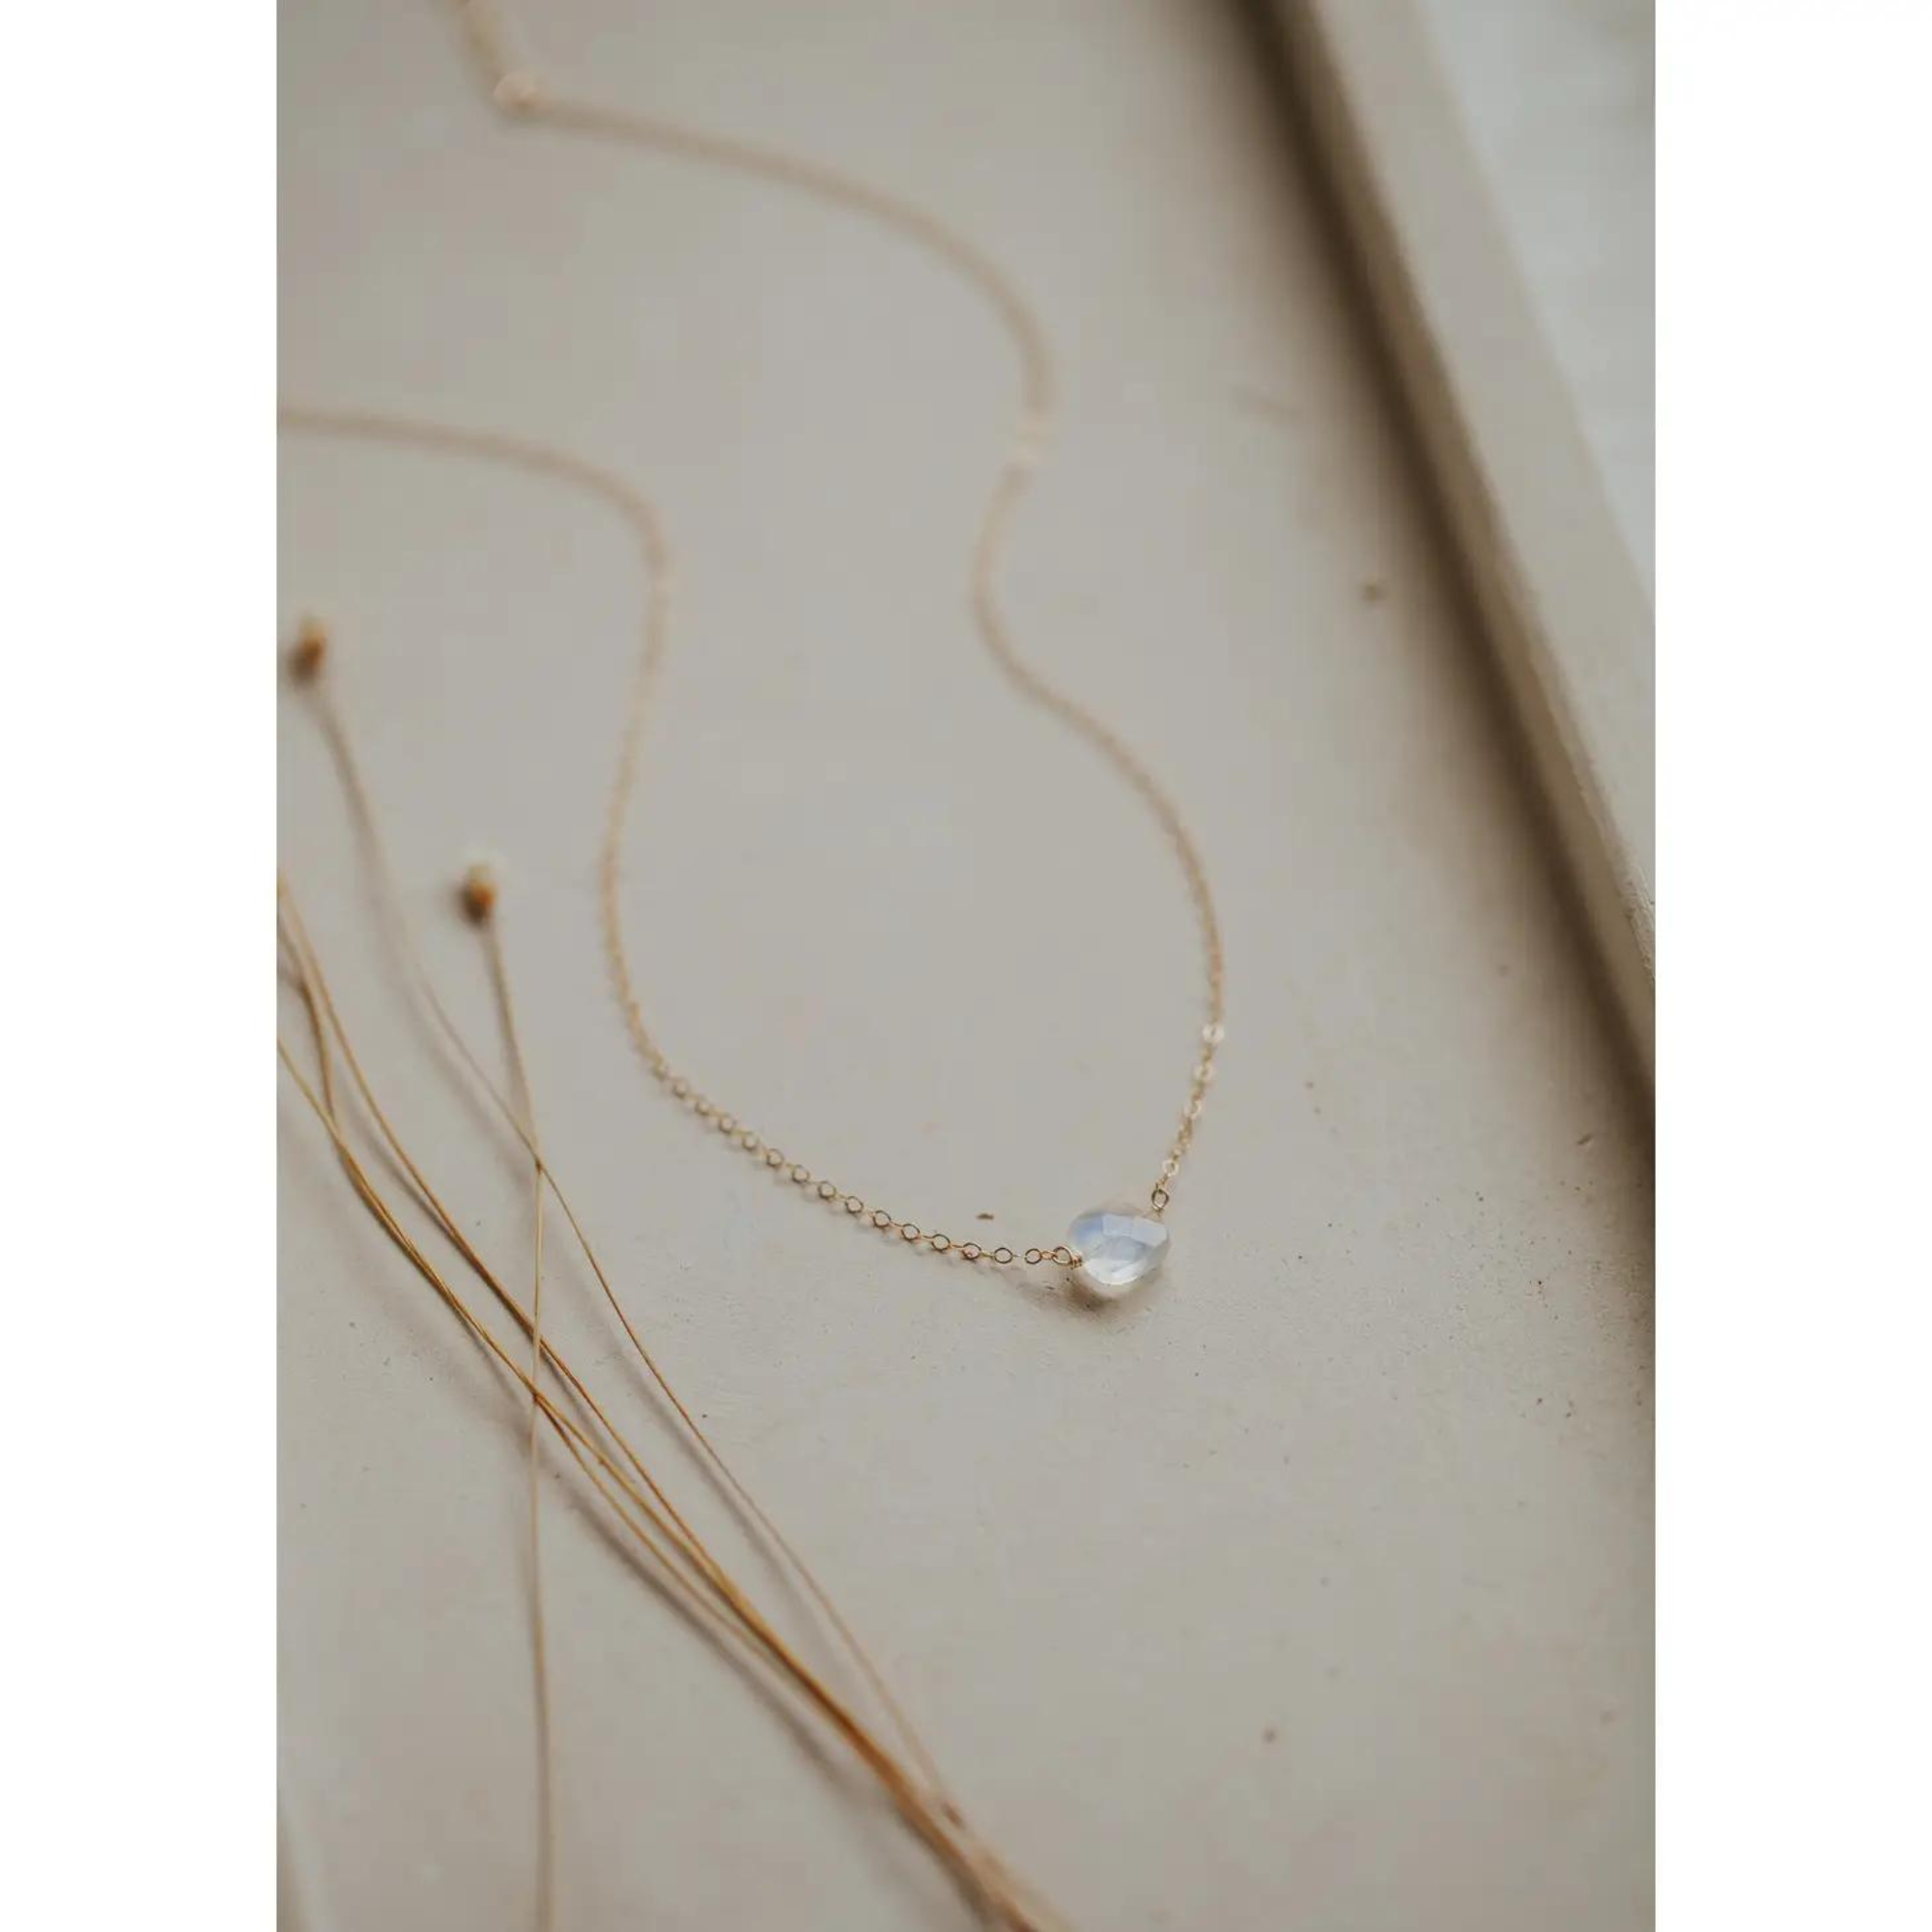 Moonstone Cushion Necklace | 14kt Gold Fill